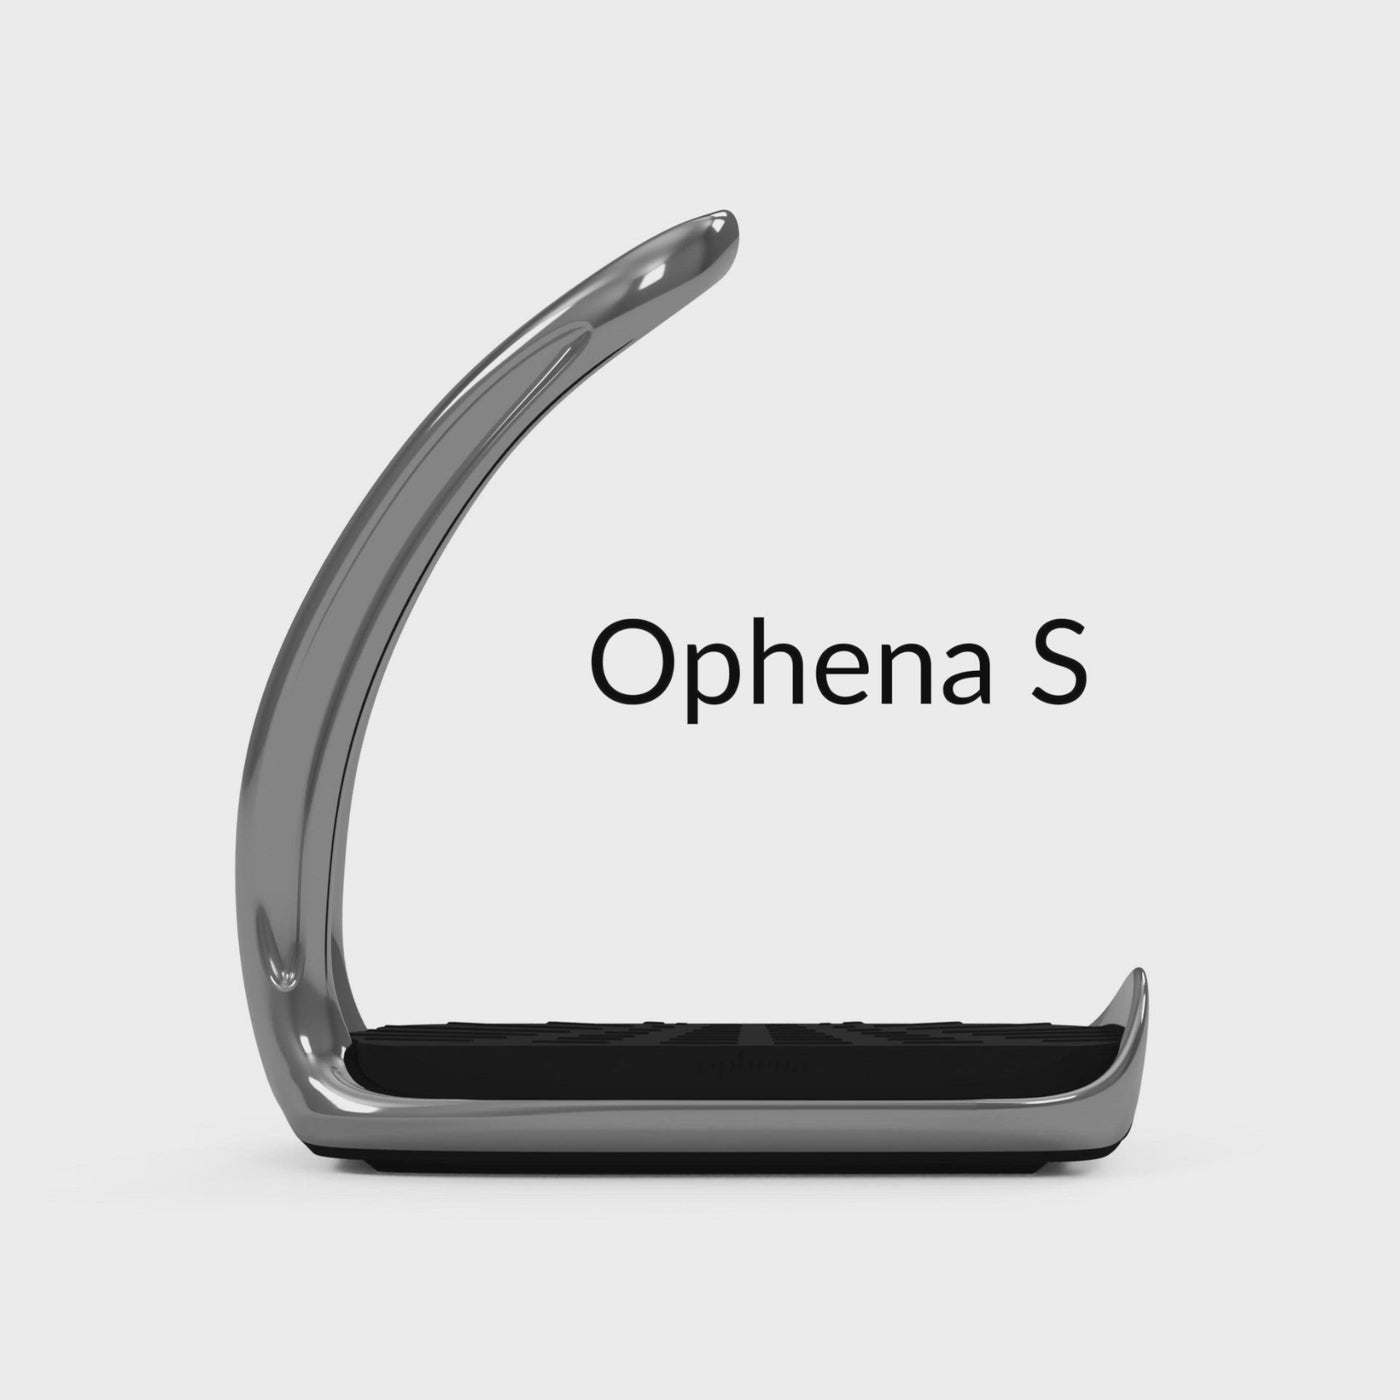 Brief Video showing the visual difference between the safety stirrups Ophena S and the Ophena S Pro 